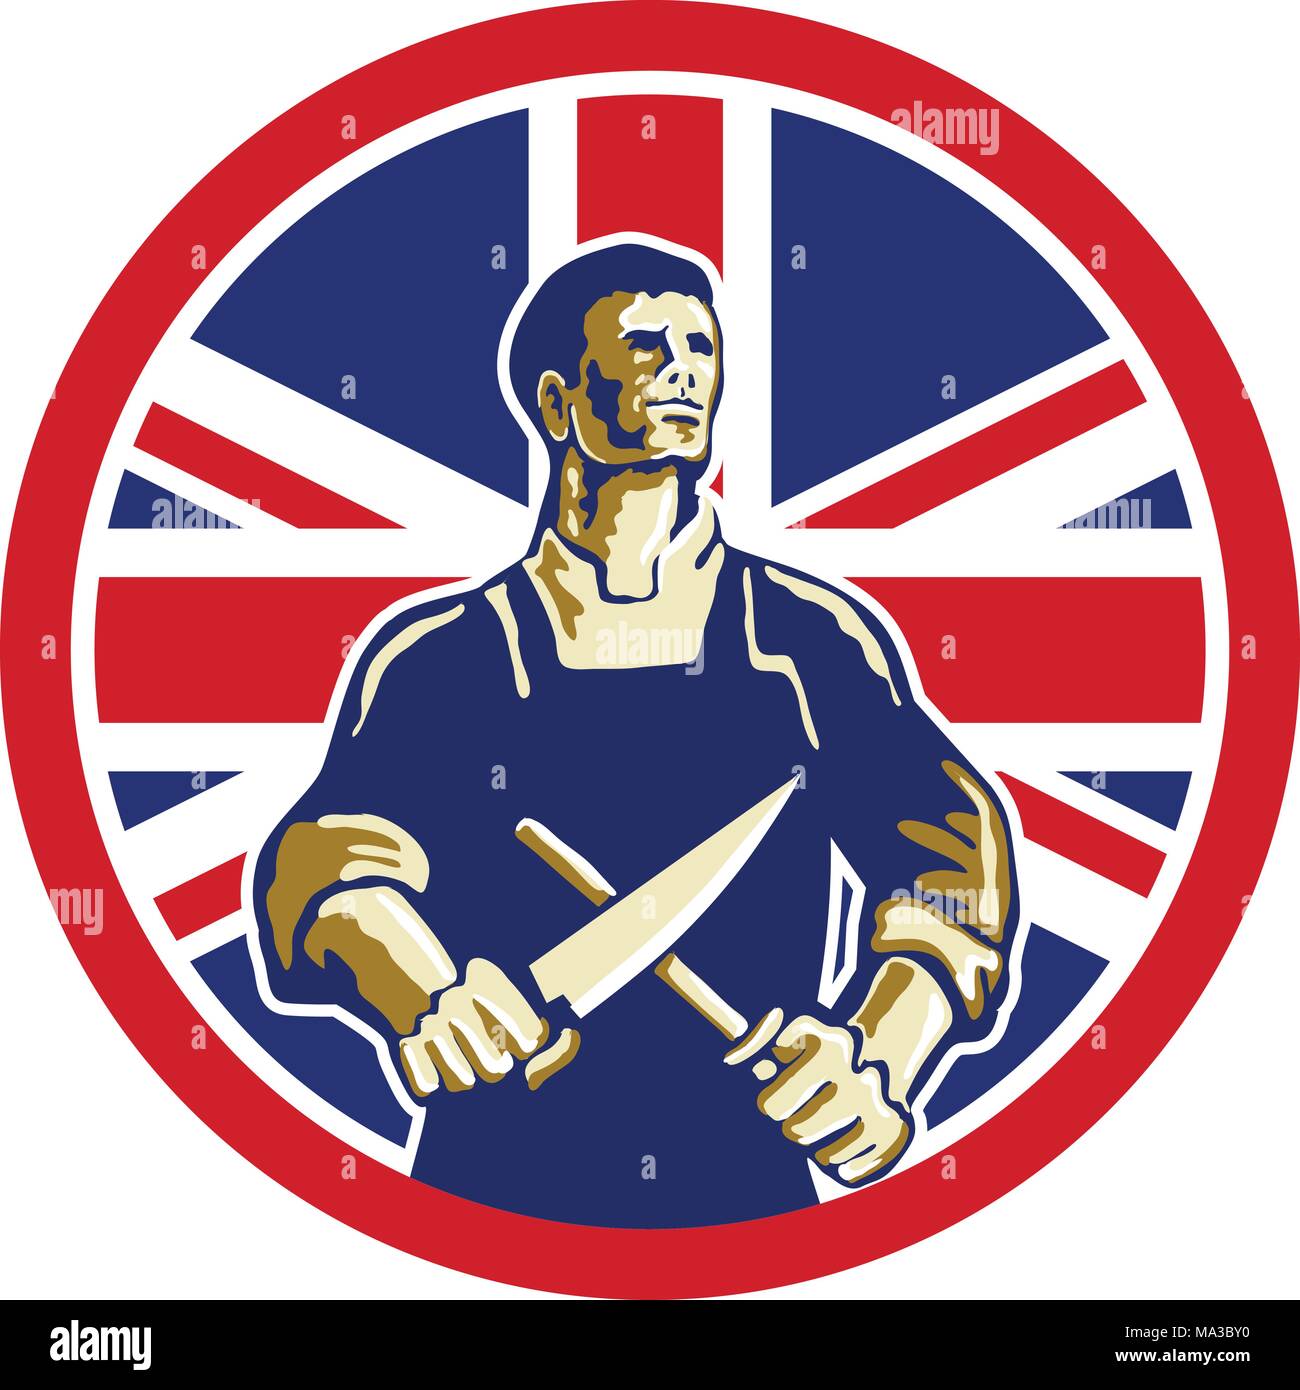 Icon retro style illustration of a British butcher sharpening knife viewed from front with United Kingdom UK, Great Britain Union Jack flag set inside Stock Vector